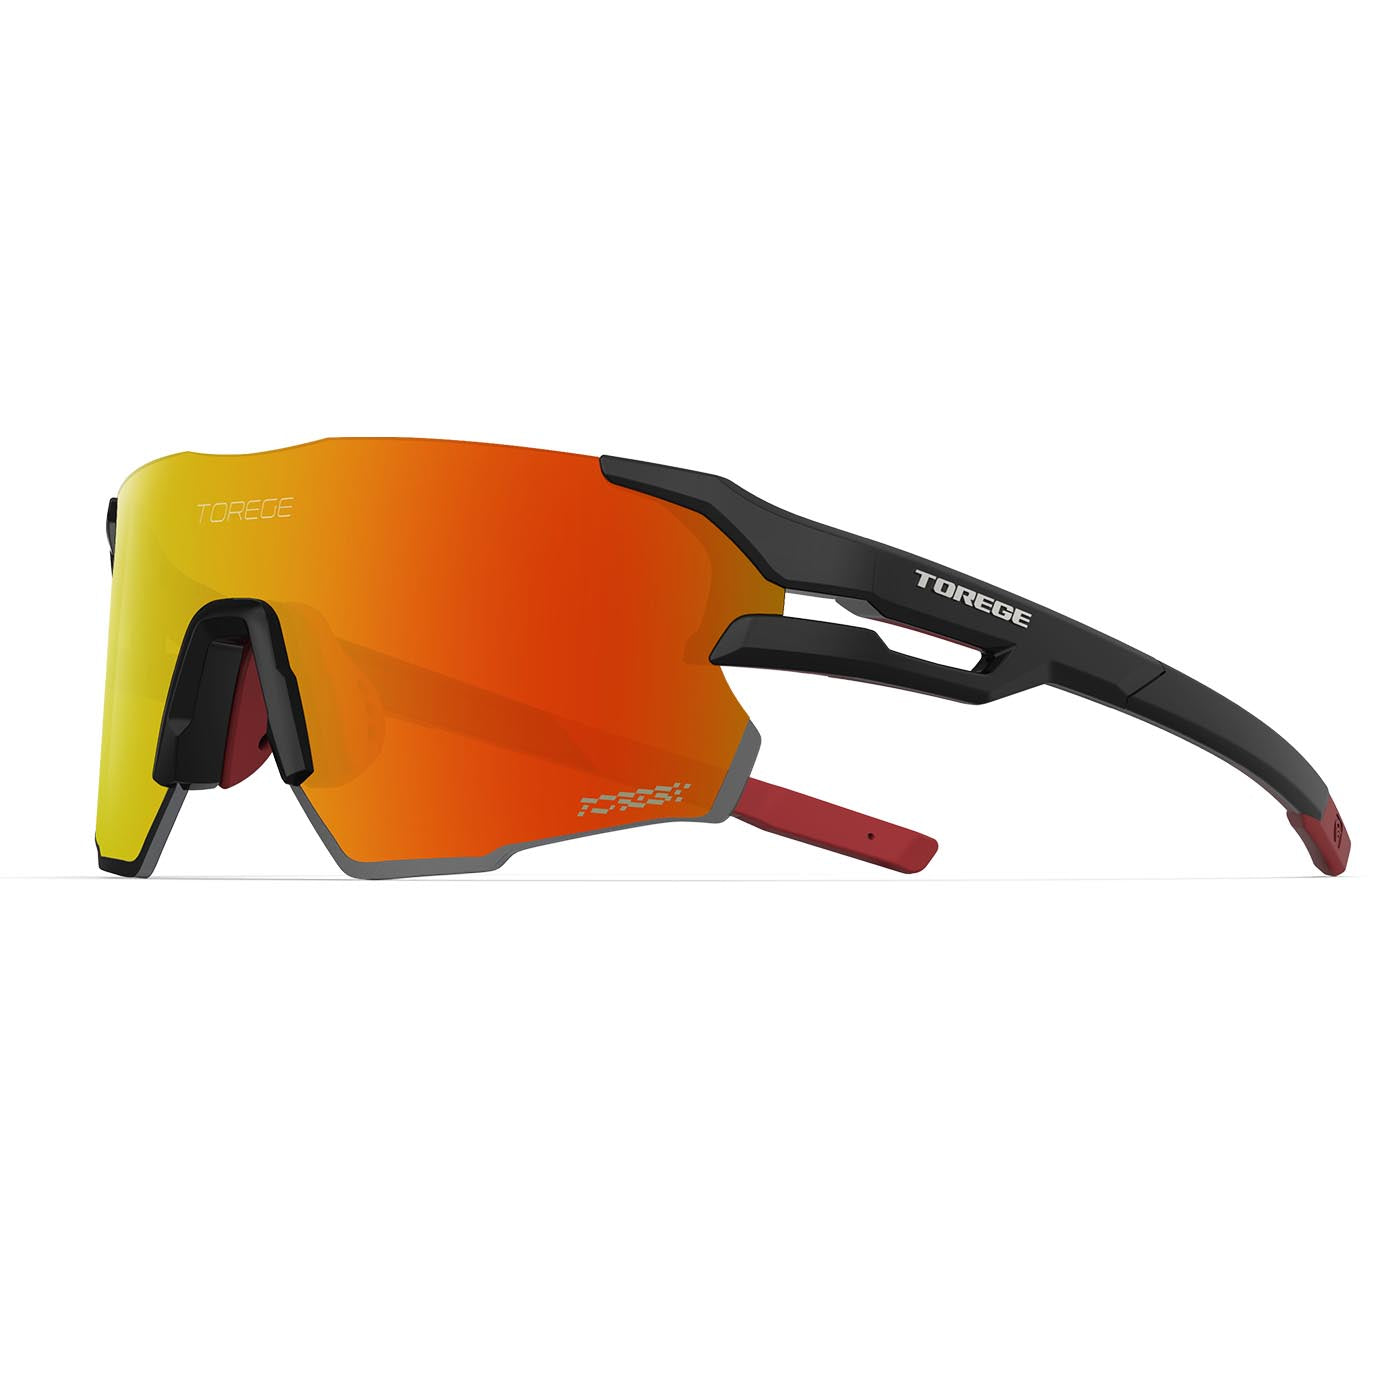 Grace Wraparound Sports Sunglasses for Men and Women - Lightweight